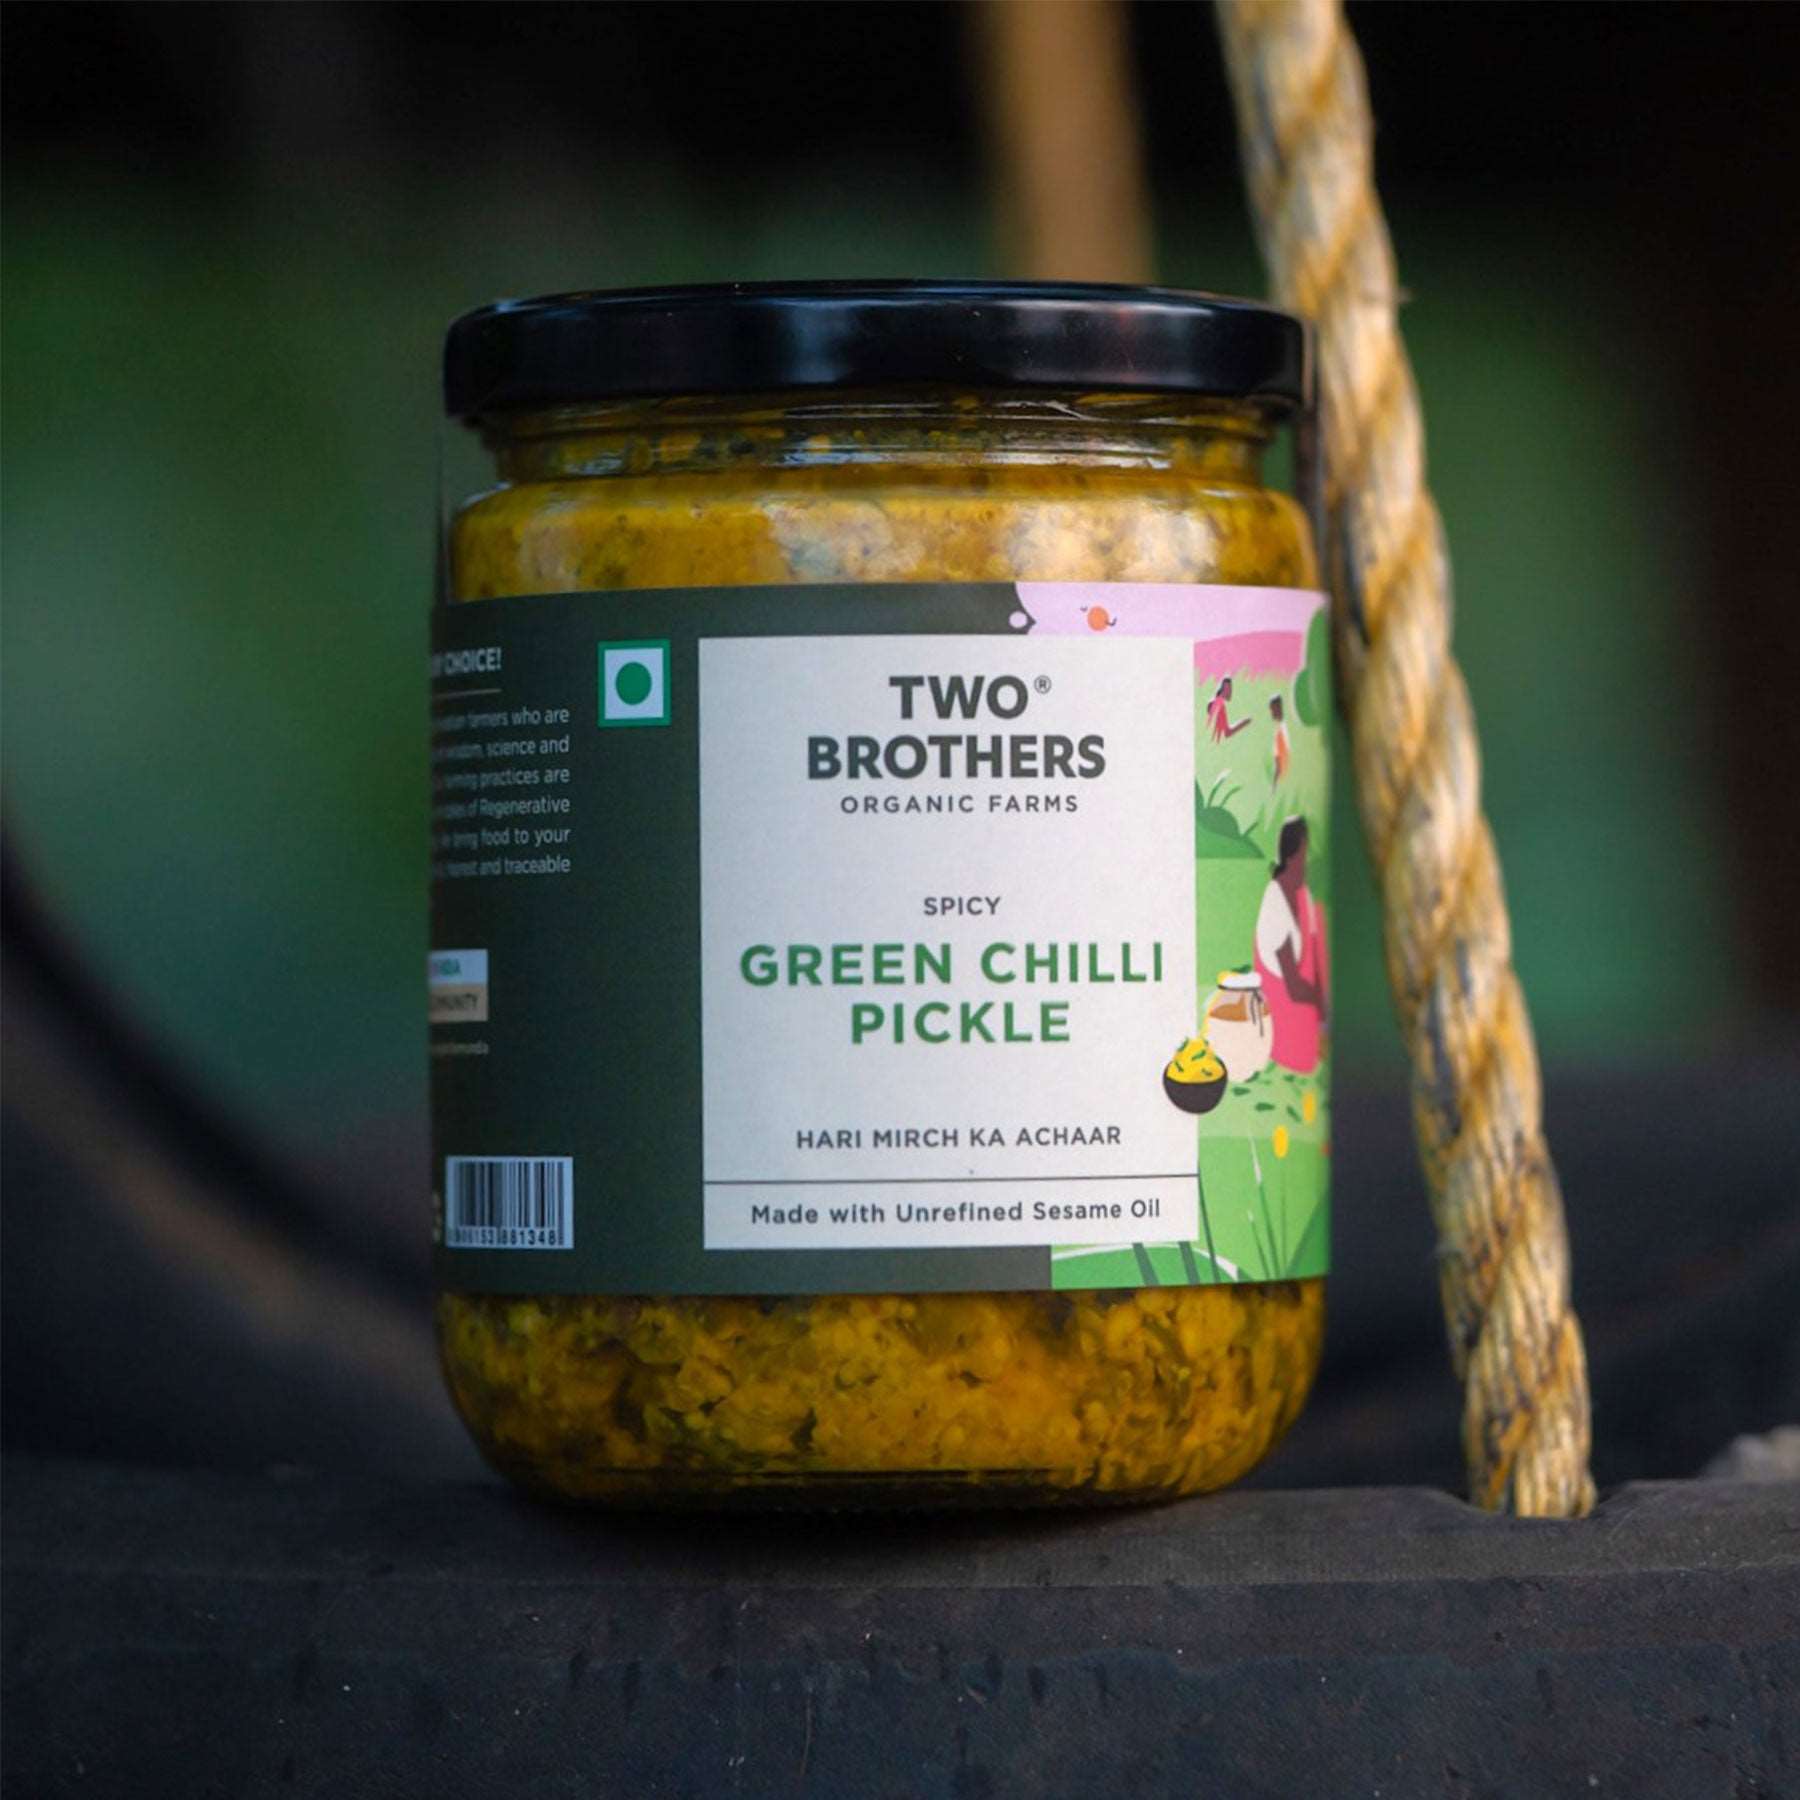 Spicy Green Chilly Pickle